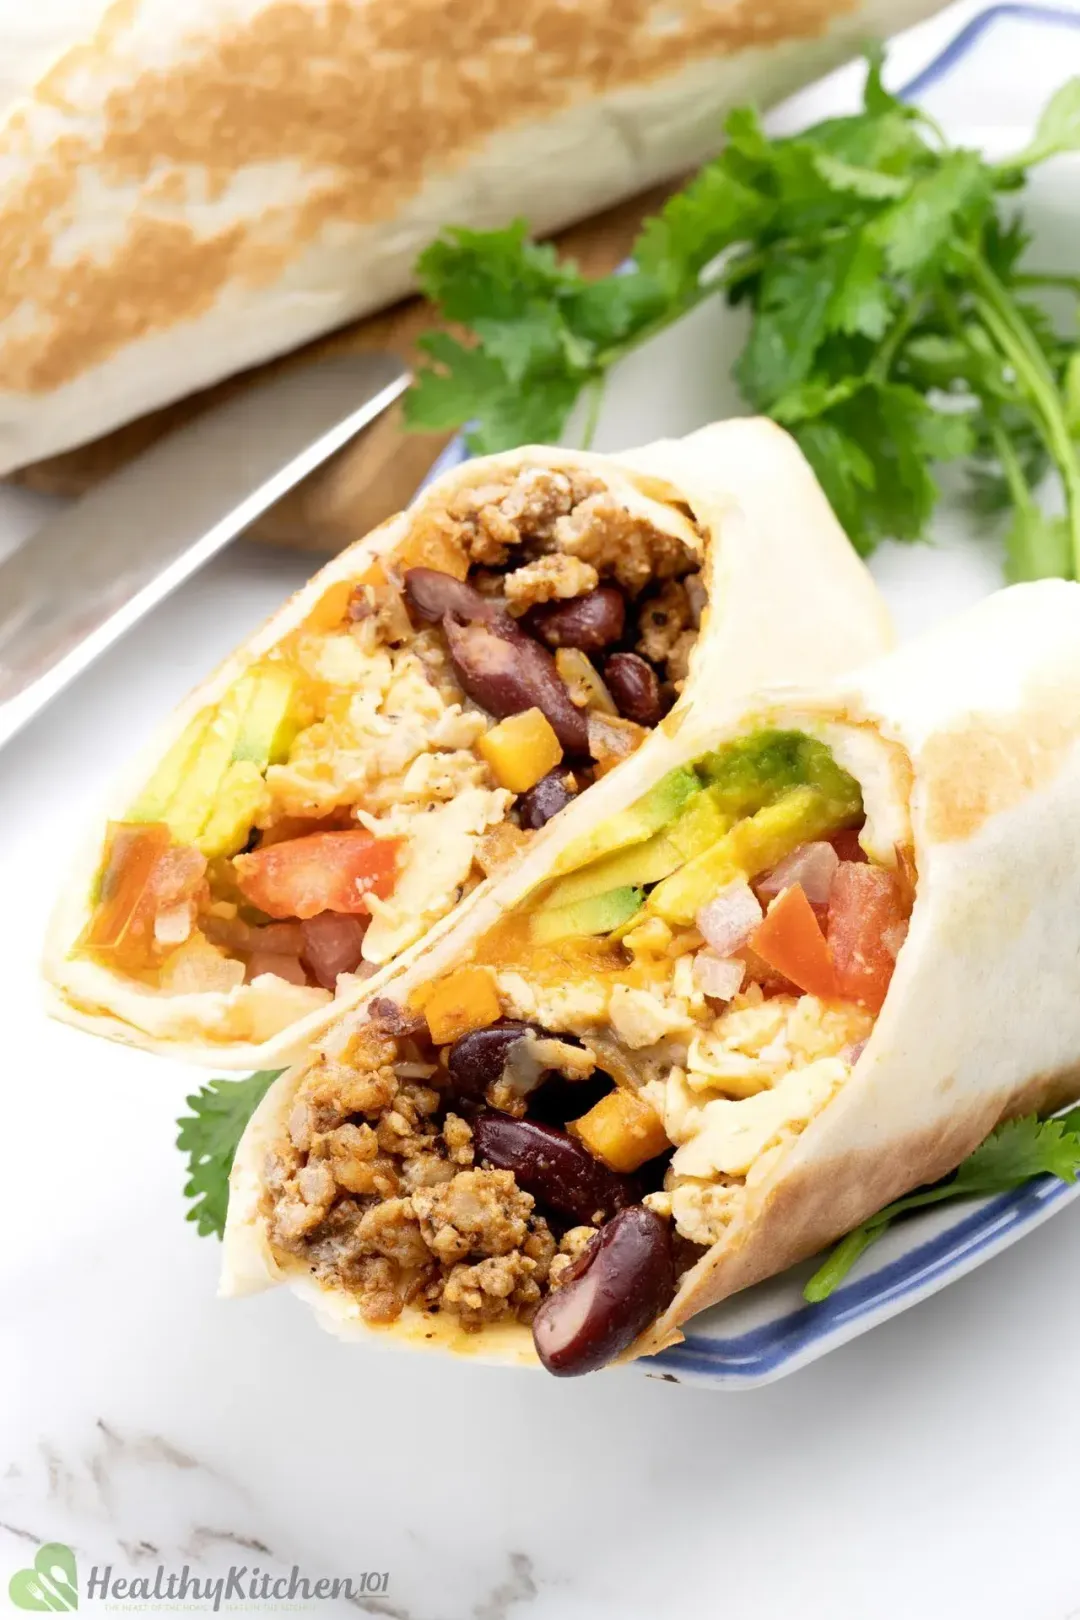 A close-up shot of a burrito roll sliced in half, aligned so that the colorful fillings show, garnished with cilantros